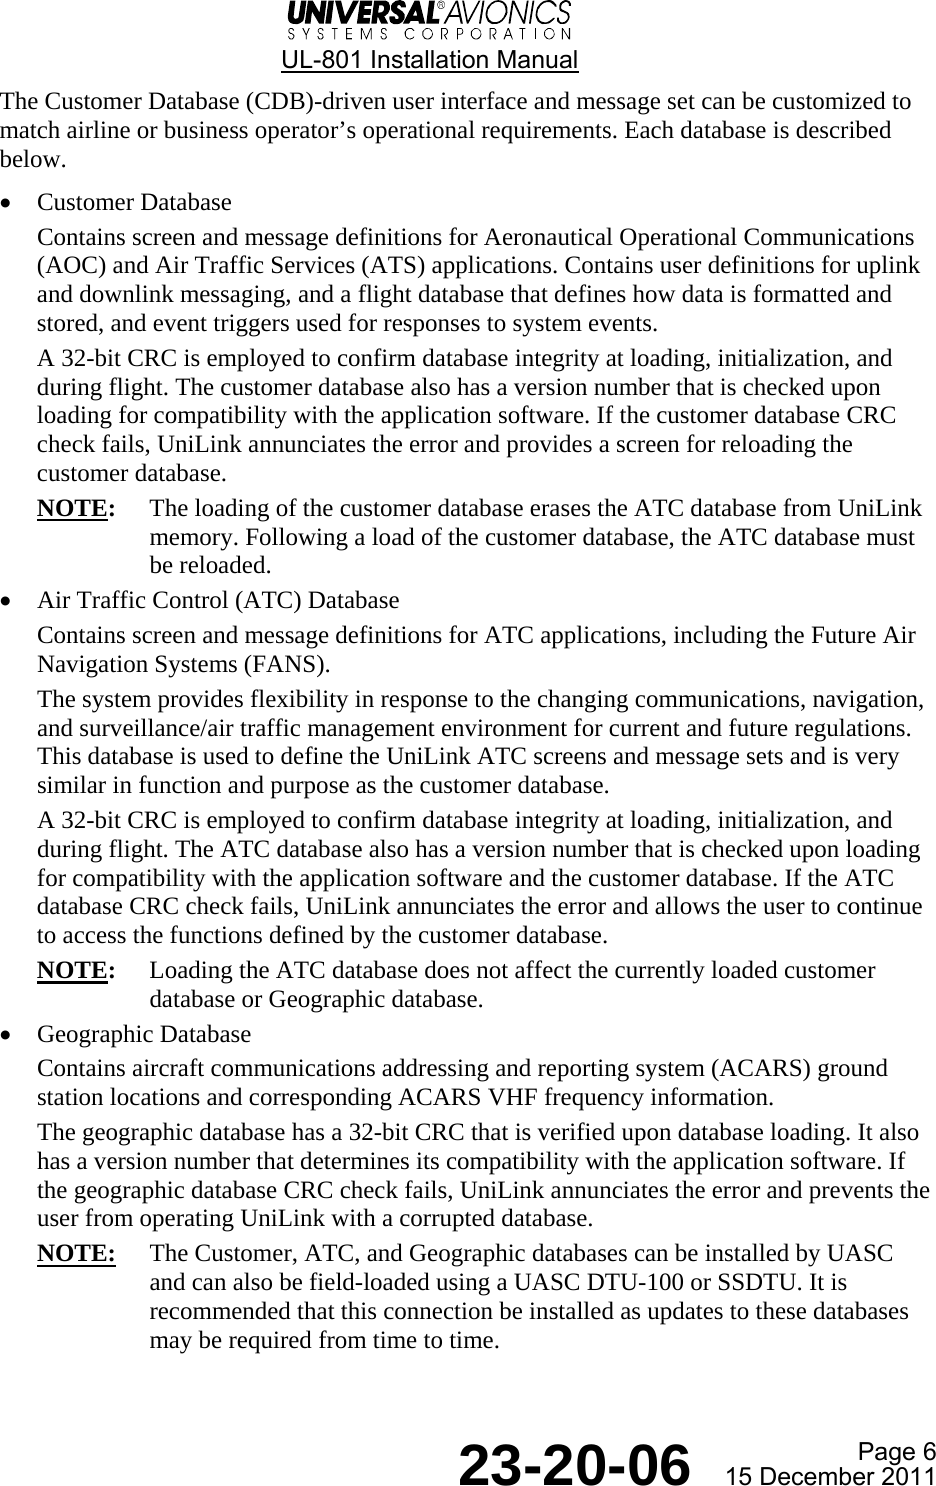  UL-801 Installation Manual  Page 6  23-20-06  15 December 2011 The Customer Database (CDB)-driven user interface and message set can be customized to match airline or business operator’s operational requirements. Each database is described below. • Customer Database Contains screen and message definitions for Aeronautical Operational Communications (AOC) and Air Traffic Services (ATS) applications. Contains user definitions for uplink and downlink messaging, and a flight database that defines how data is formatted and stored, and event triggers used for responses to system events. A 32-bit CRC is employed to confirm database integrity at loading, initialization, and during flight. The customer database also has a version number that is checked upon loading for compatibility with the application software. If the customer database CRC check fails, UniLink annunciates the error and provides a screen for reloading the customer database. NOTE:  The loading of the customer database erases the ATC database from UniLink memory. Following a load of the customer database, the ATC database must be reloaded. • Air Traffic Control (ATC) Database Contains screen and message definitions for ATC applications, including the Future Air Navigation Systems (FANS). The system provides flexibility in response to the changing communications, navigation, and surveillance/air traffic management environment for current and future regulations. This database is used to define the UniLink ATC screens and message sets and is very similar in function and purpose as the customer database. A 32-bit CRC is employed to confirm database integrity at loading, initialization, and during flight. The ATC database also has a version number that is checked upon loading for compatibility with the application software and the customer database. If the ATC database CRC check fails, UniLink annunciates the error and allows the user to continue to access the functions defined by the customer database. NOTE:  Loading the ATC database does not affect the currently loaded customer database or Geographic database. • Geographic Database Contains aircraft communications addressing and reporting system (ACARS) ground station locations and corresponding ACARS VHF frequency information. The geographic database has a 32-bit CRC that is verified upon database loading. It also has a version number that determines its compatibility with the application software. If the geographic database CRC check fails, UniLink annunciates the error and prevents the user from operating UniLink with a corrupted database. NOTE:  The Customer, ATC, and Geographic databases can be installed by UASC and can also be field-loaded using a UASC DTU-100 or SSDTU. It is recommended that this connection be installed as updates to these databases may be required from time to time.   